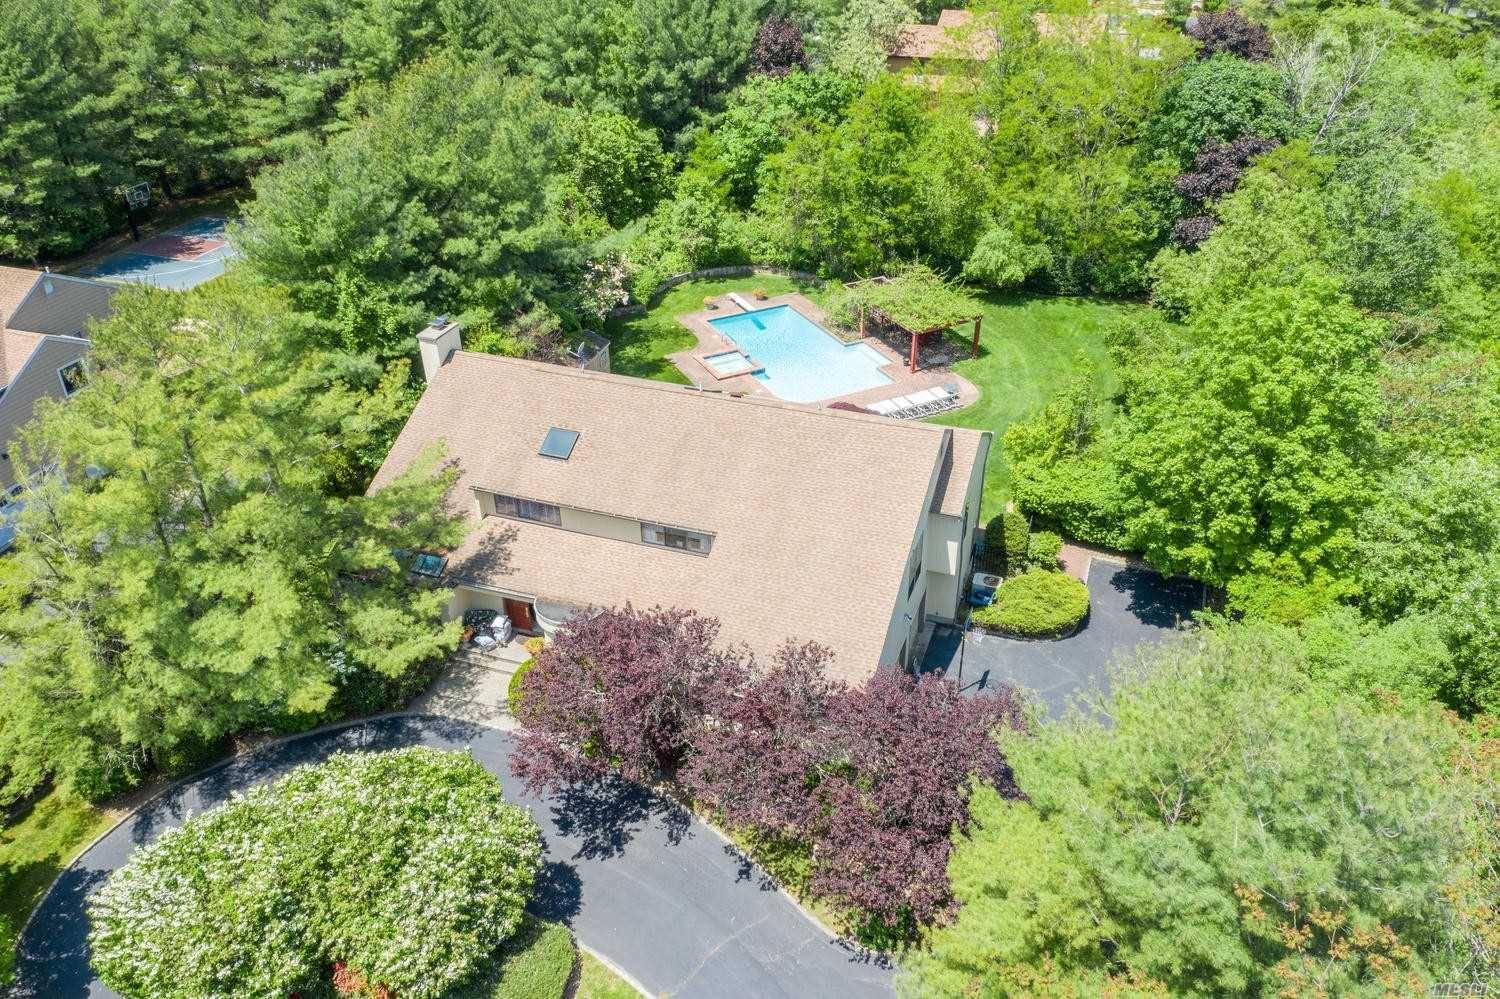 Sprawling Contemp Colonial In Prestigious Gated Community Set On Over Half Acre.